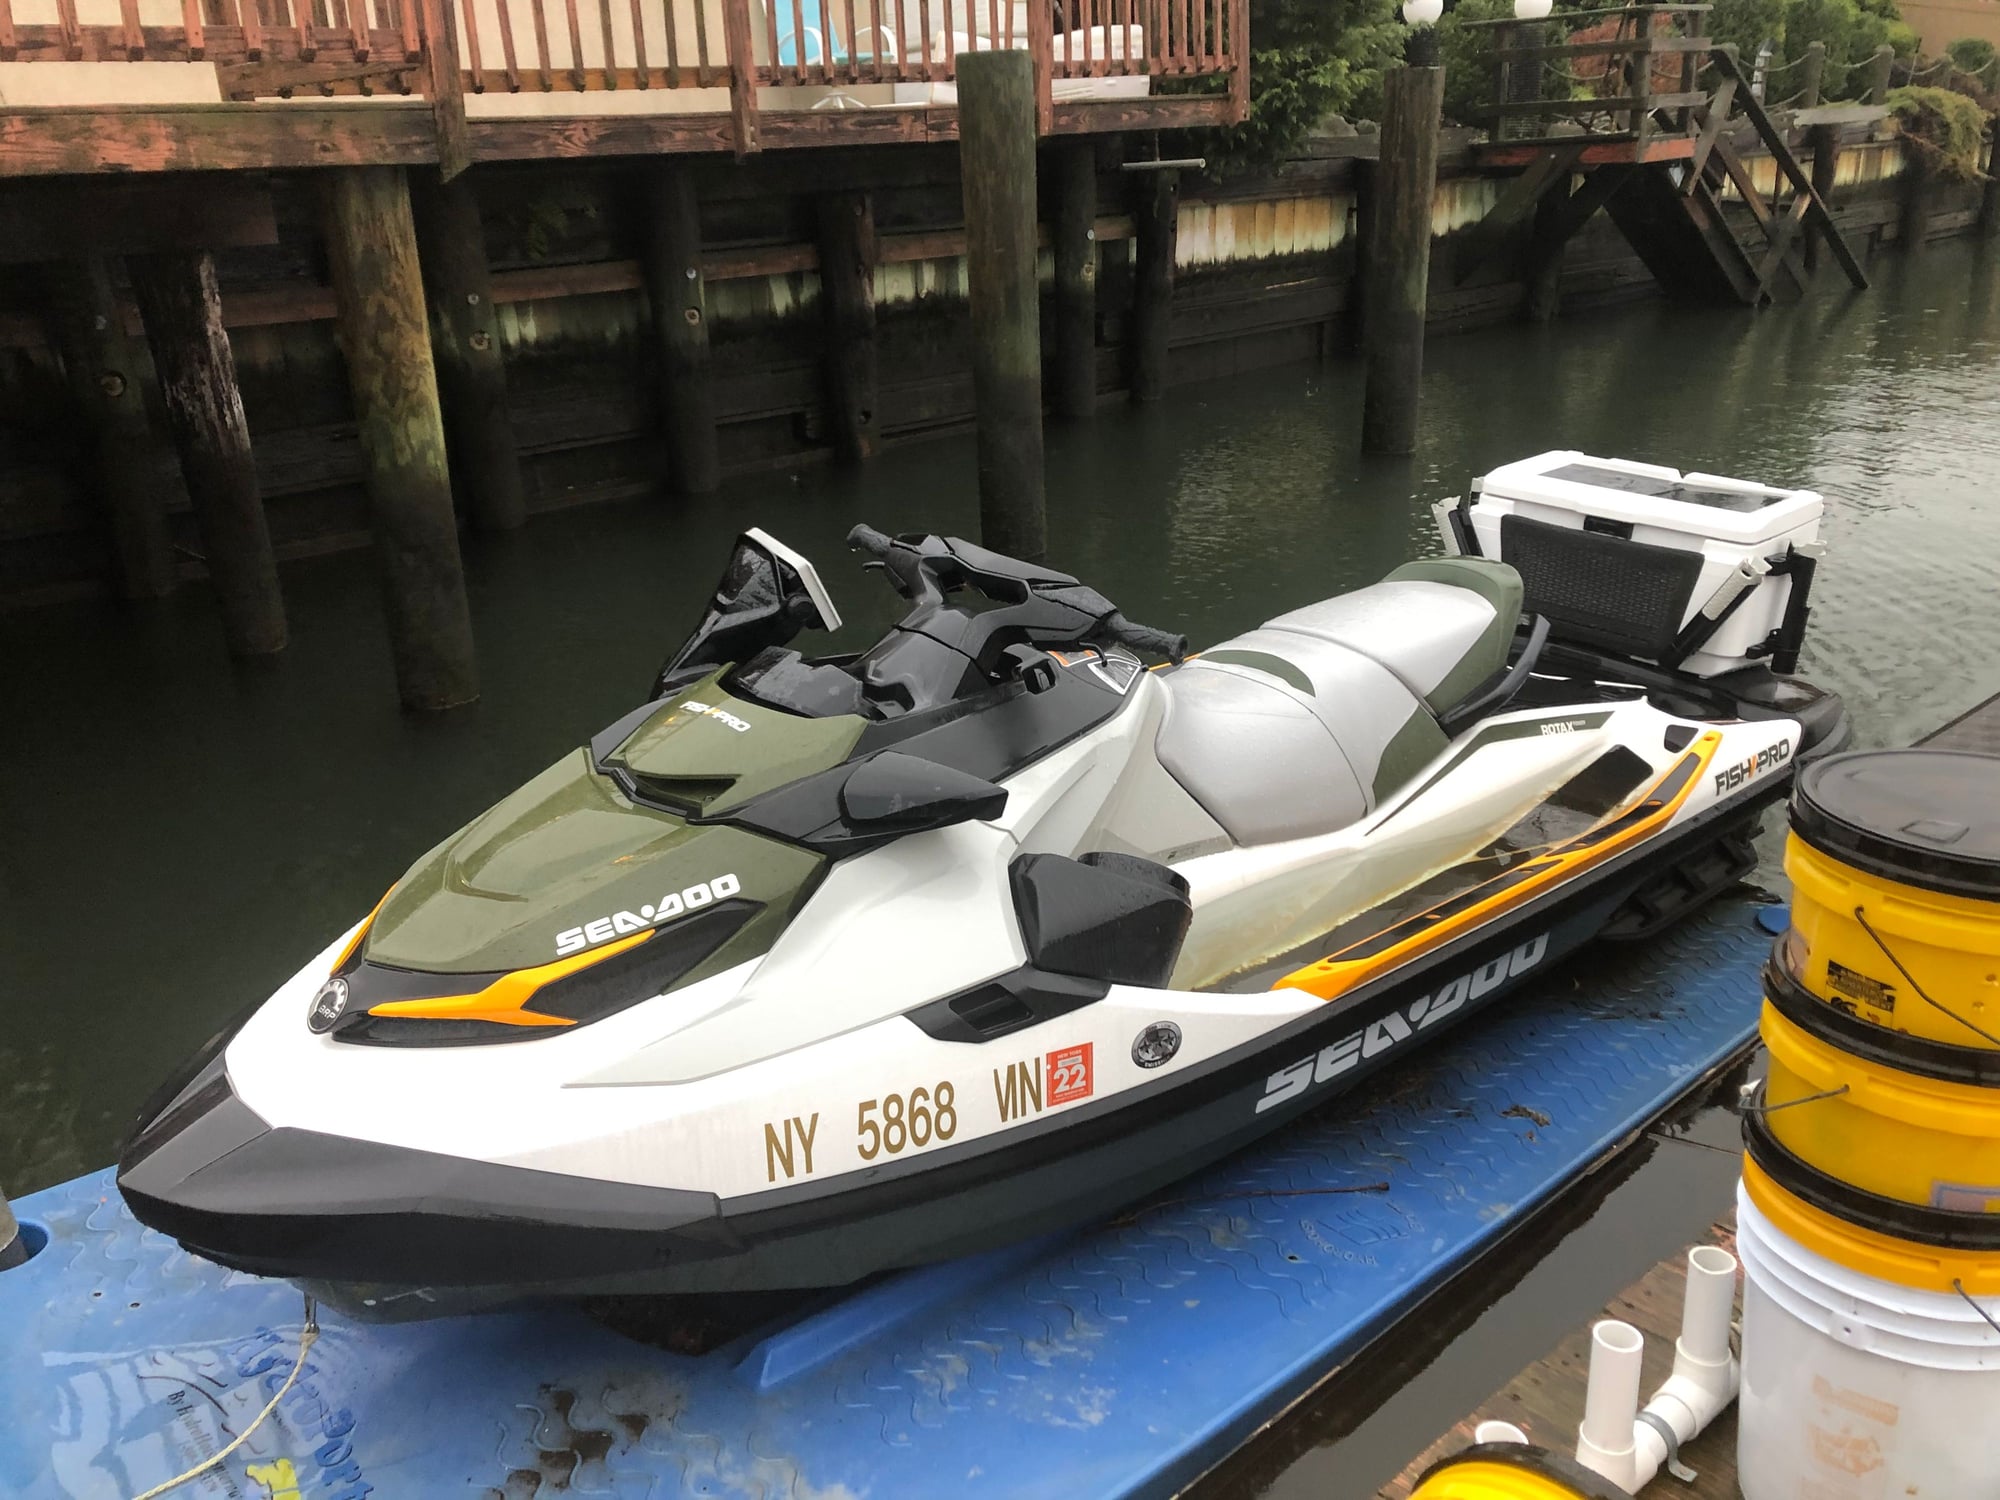 Seadoo fish pro - The Hull Truth - Boating and Fishing Forum